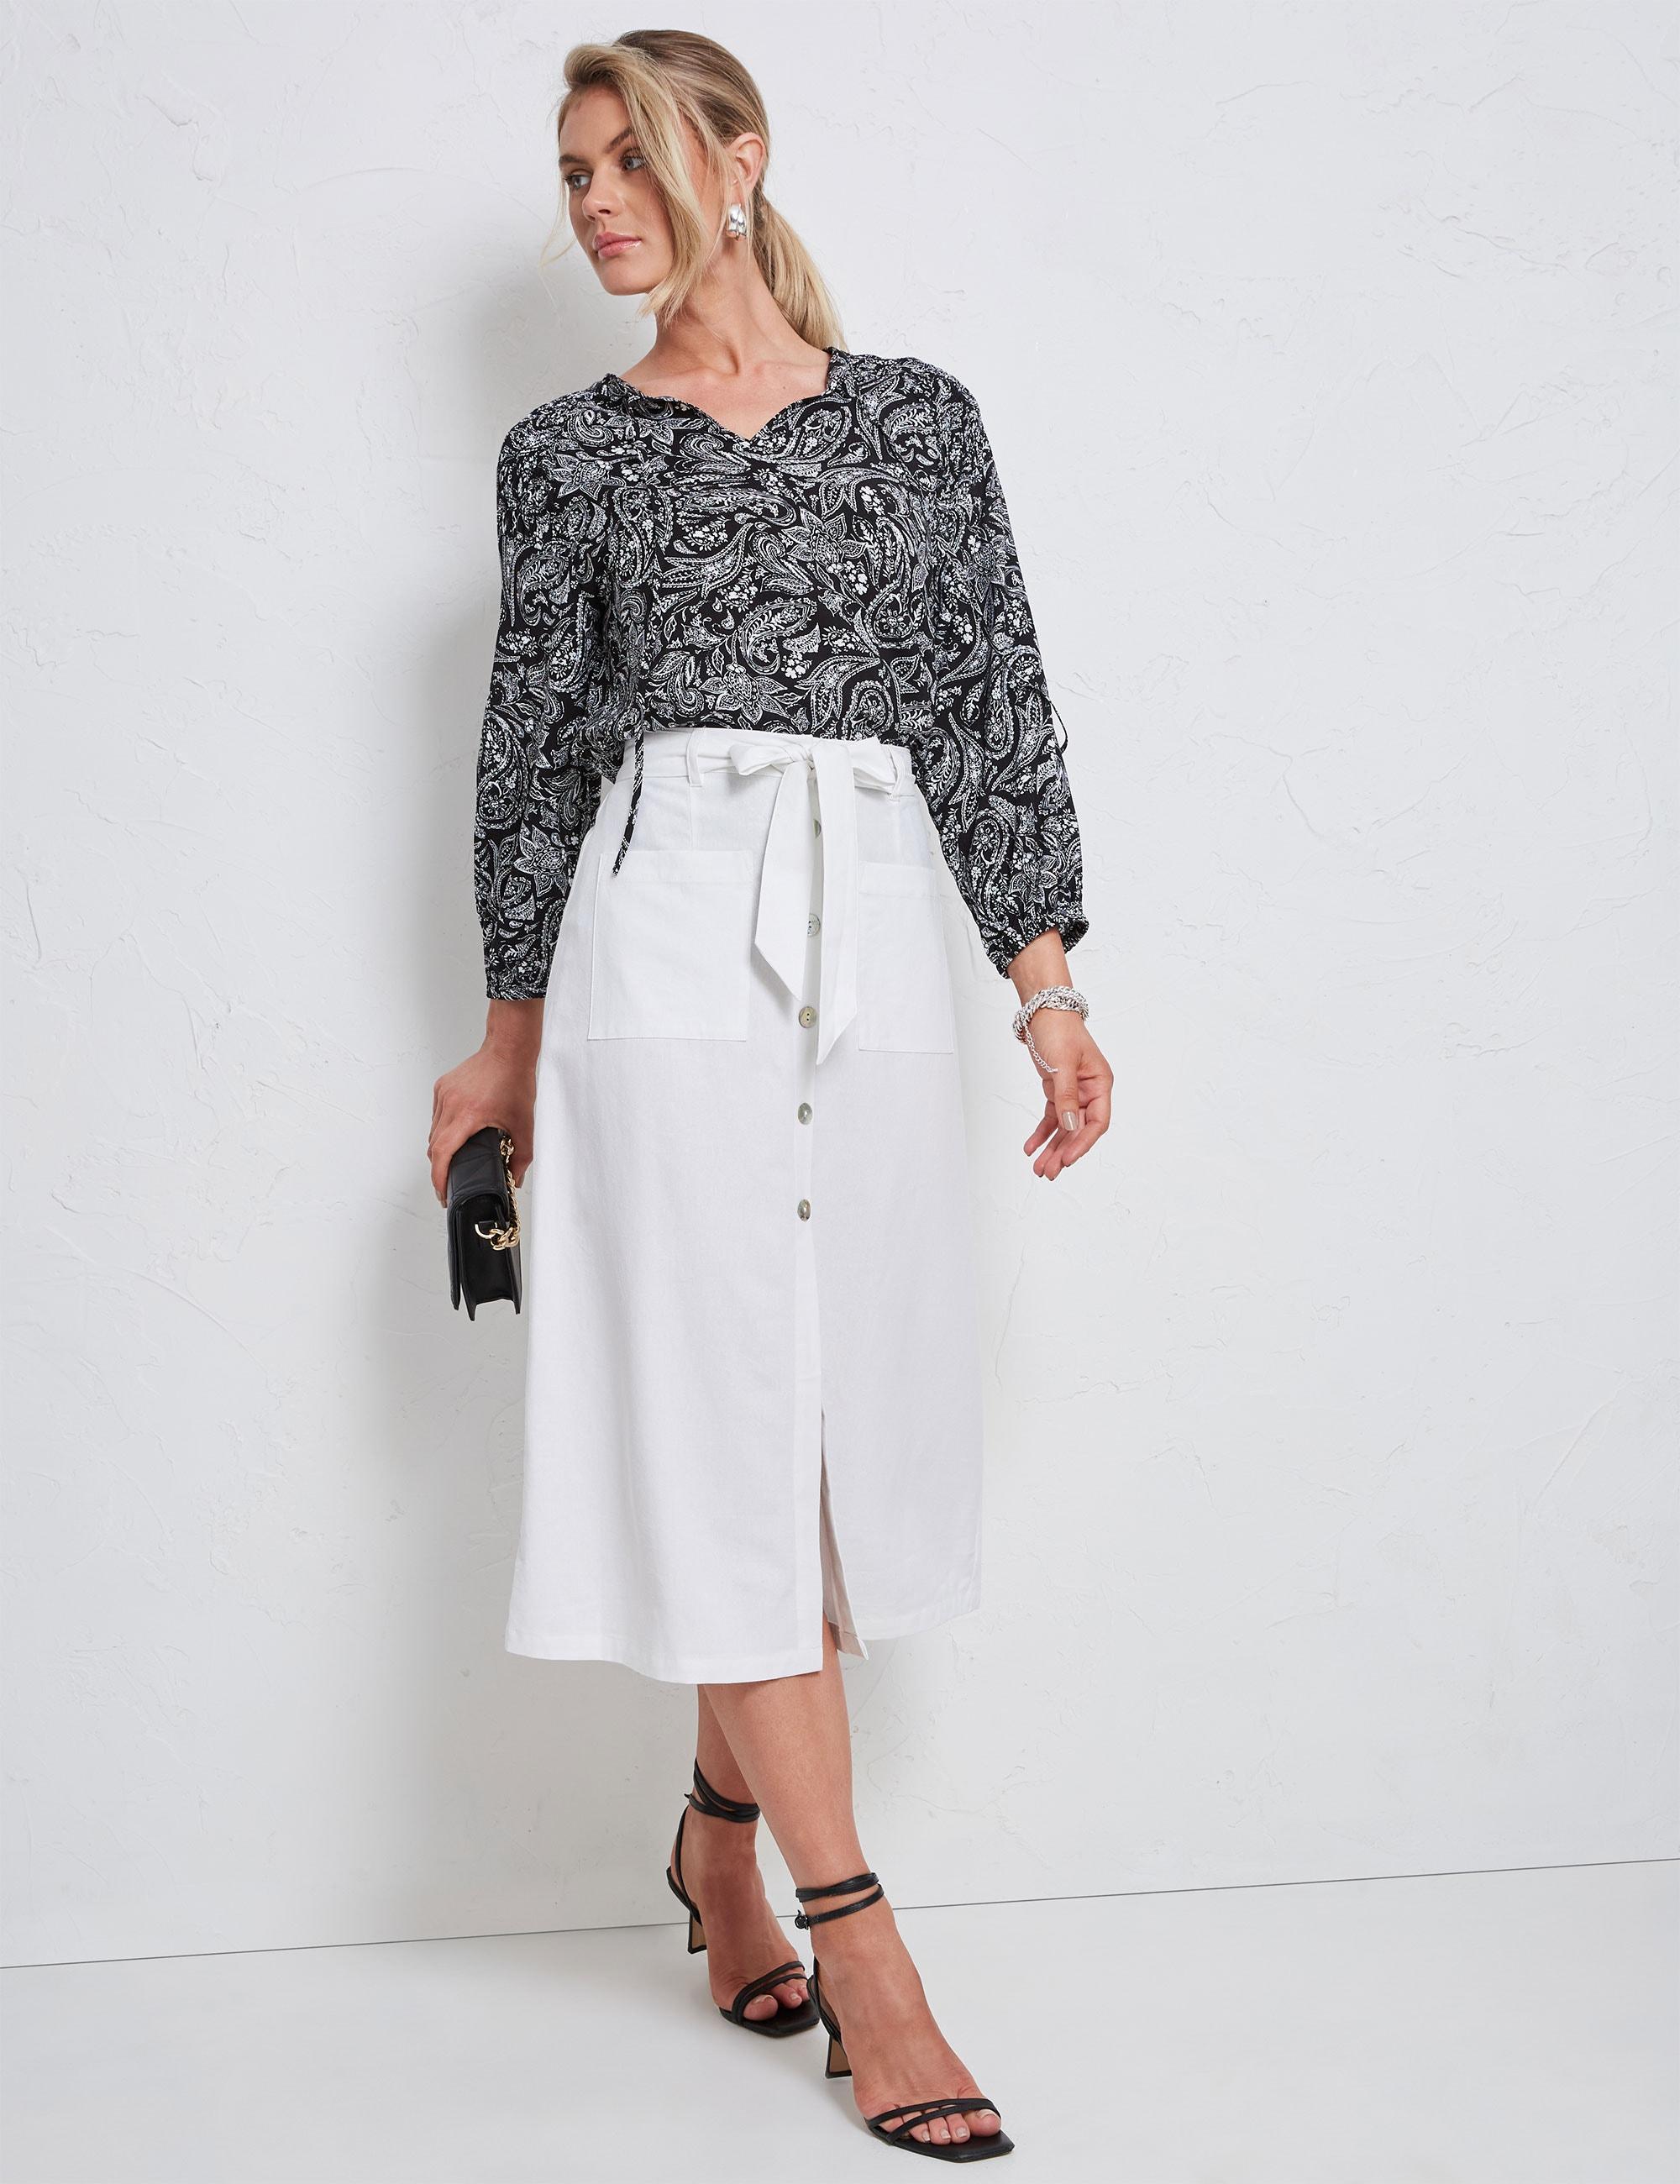 KATIES - Womens Skirts - Midi - Summer - White - Linen - Straight - Fashion - Oversized - - Button Front - Knee Length - Work Clothes - Office Wear